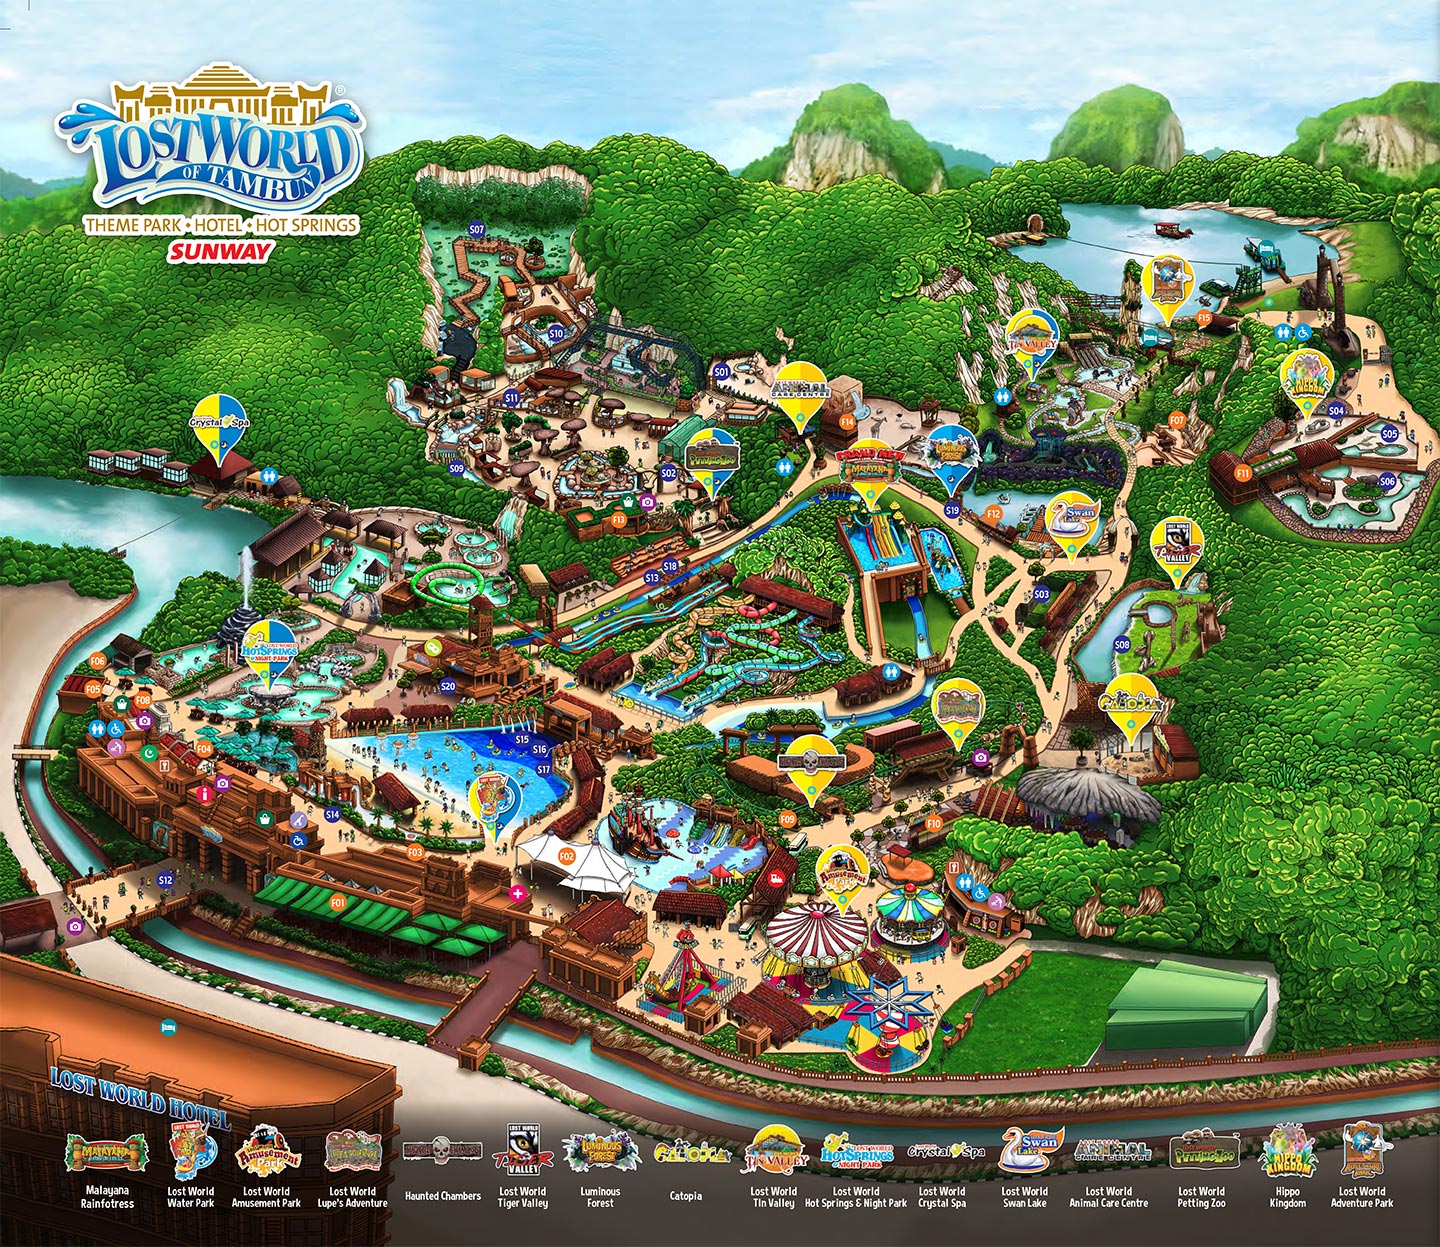 Pre Arrival Tips And Information Lost World Of Tambun